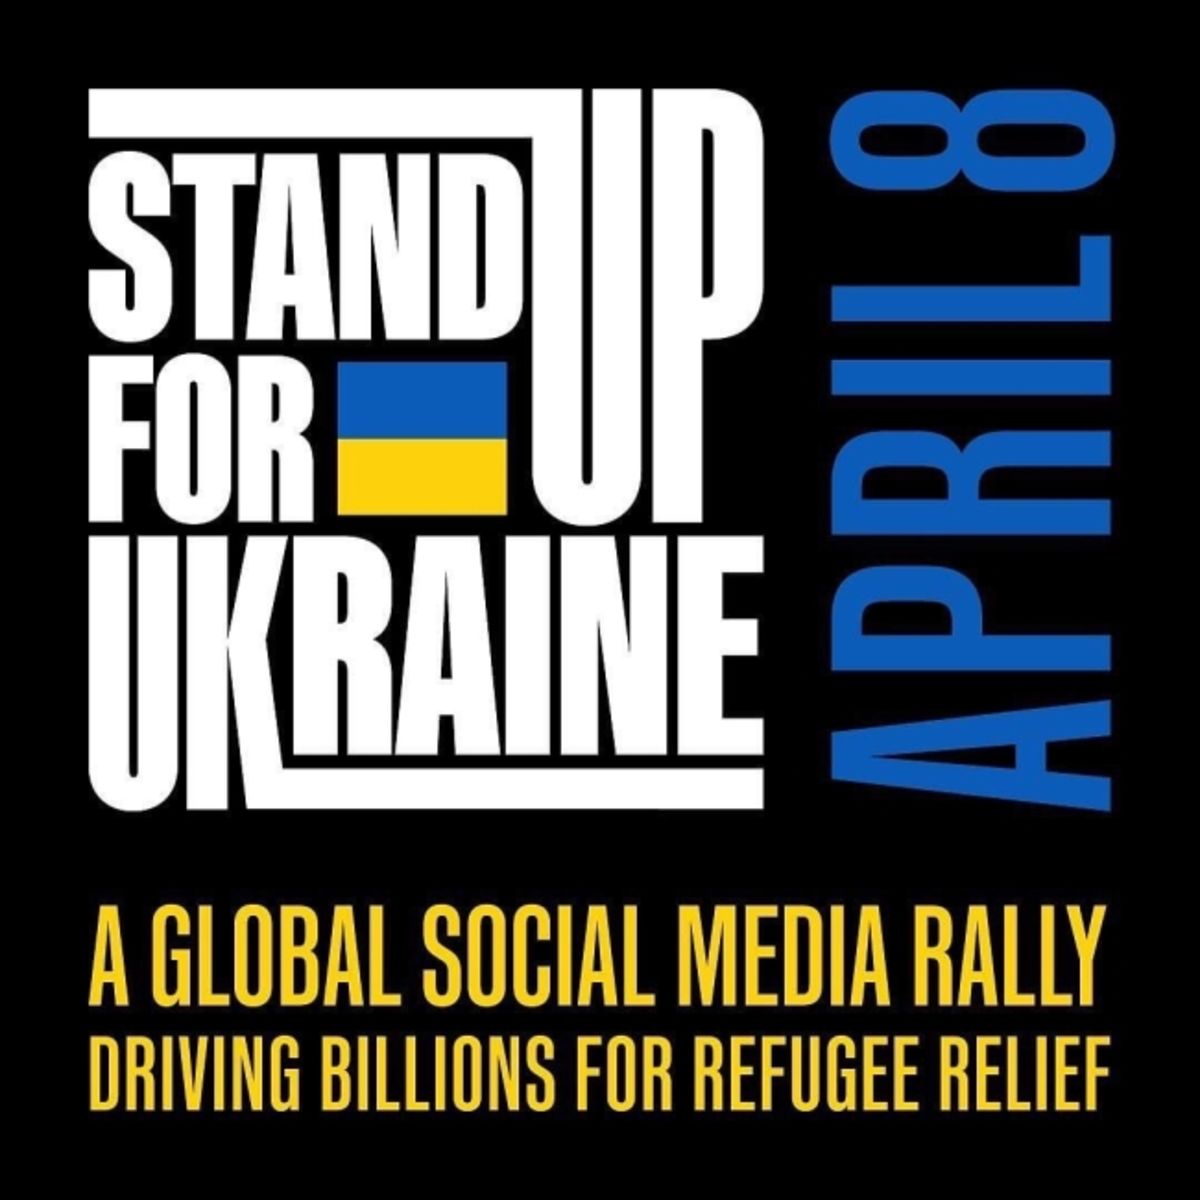 AEG Presents Supports Global Citizen's "Stand Up For Ukraine!" Campaign